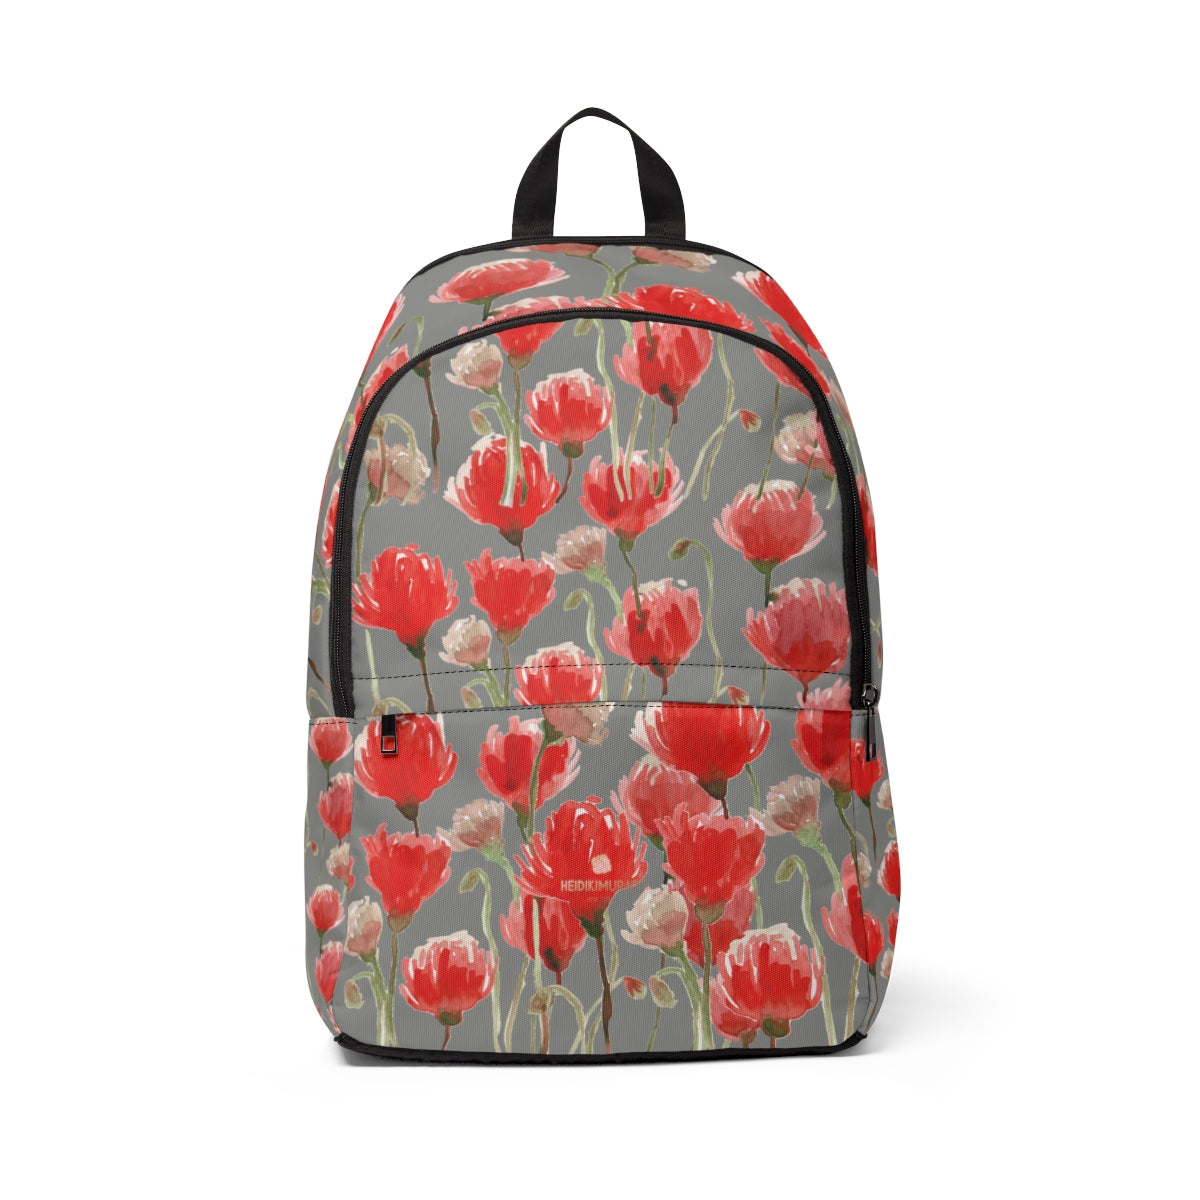 Gray & Red Poppy Flower Floral Print Fabric Backpack School Bag With Laptop Slot-Backpack-One Size-Heidi Kimura Art LLC Gray Red Poppy Backpack, Gray & Red Poppy Flower Floral Print Designer Unisex Fabric Backpack School Bag With Laptop Slot